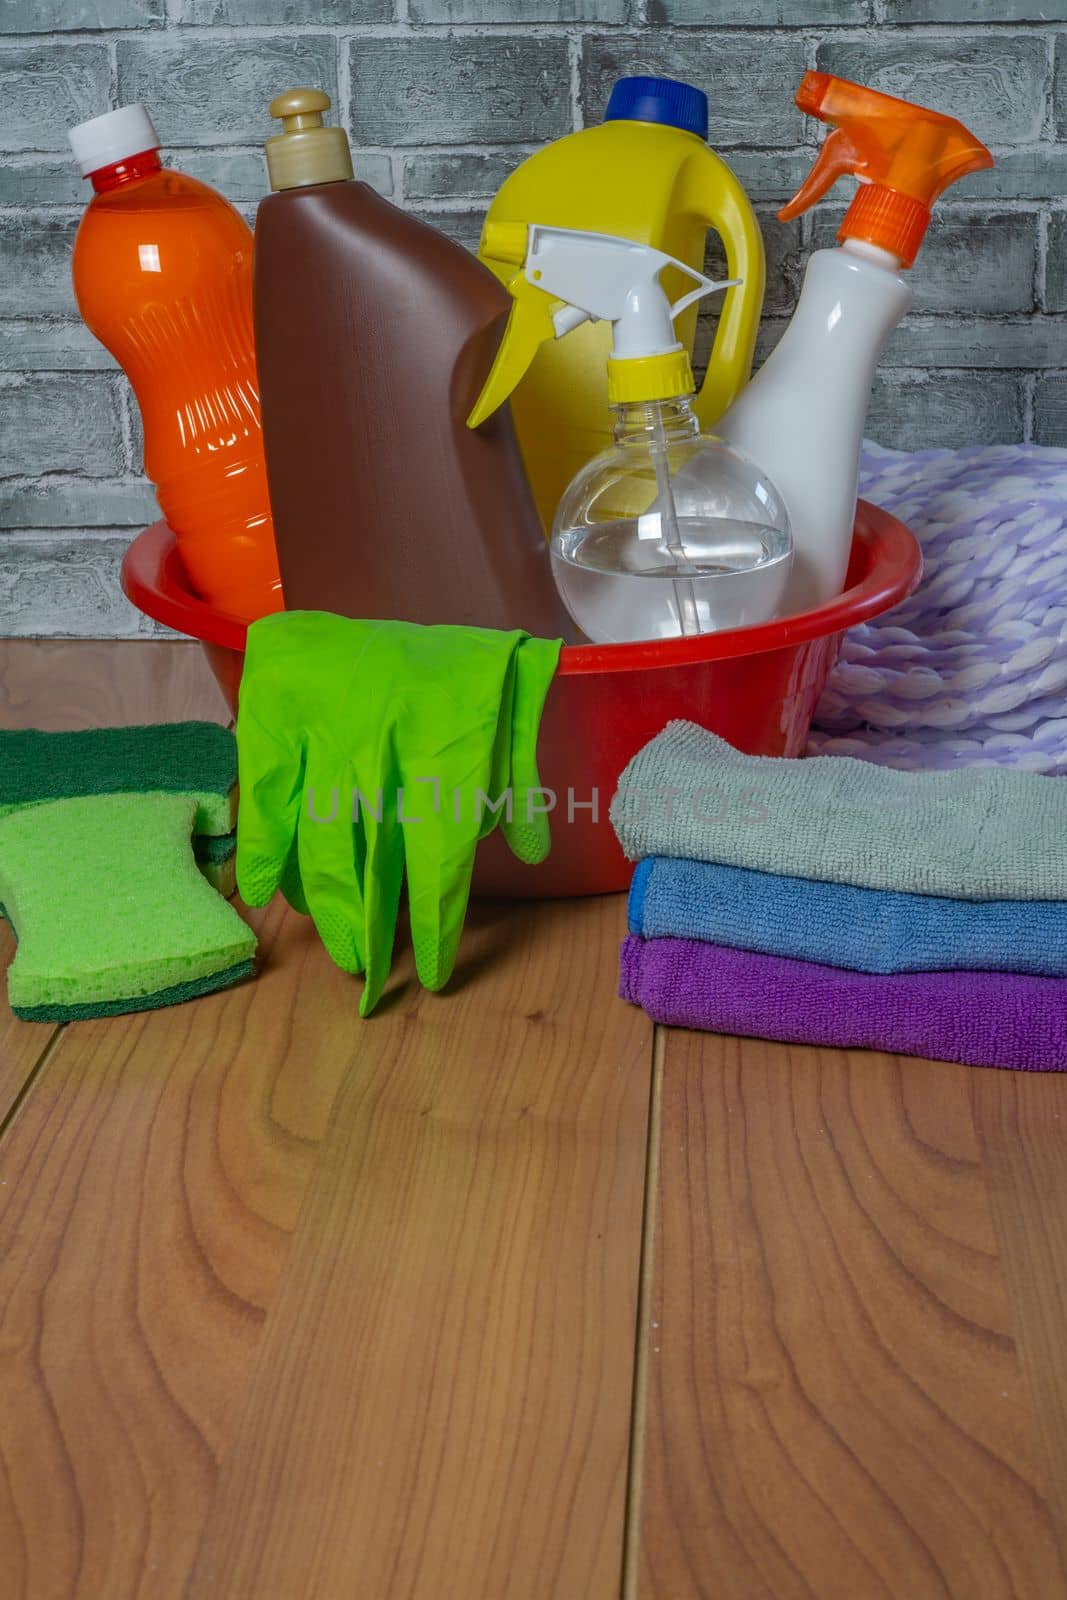 cleaning products used by a woman by joseantona